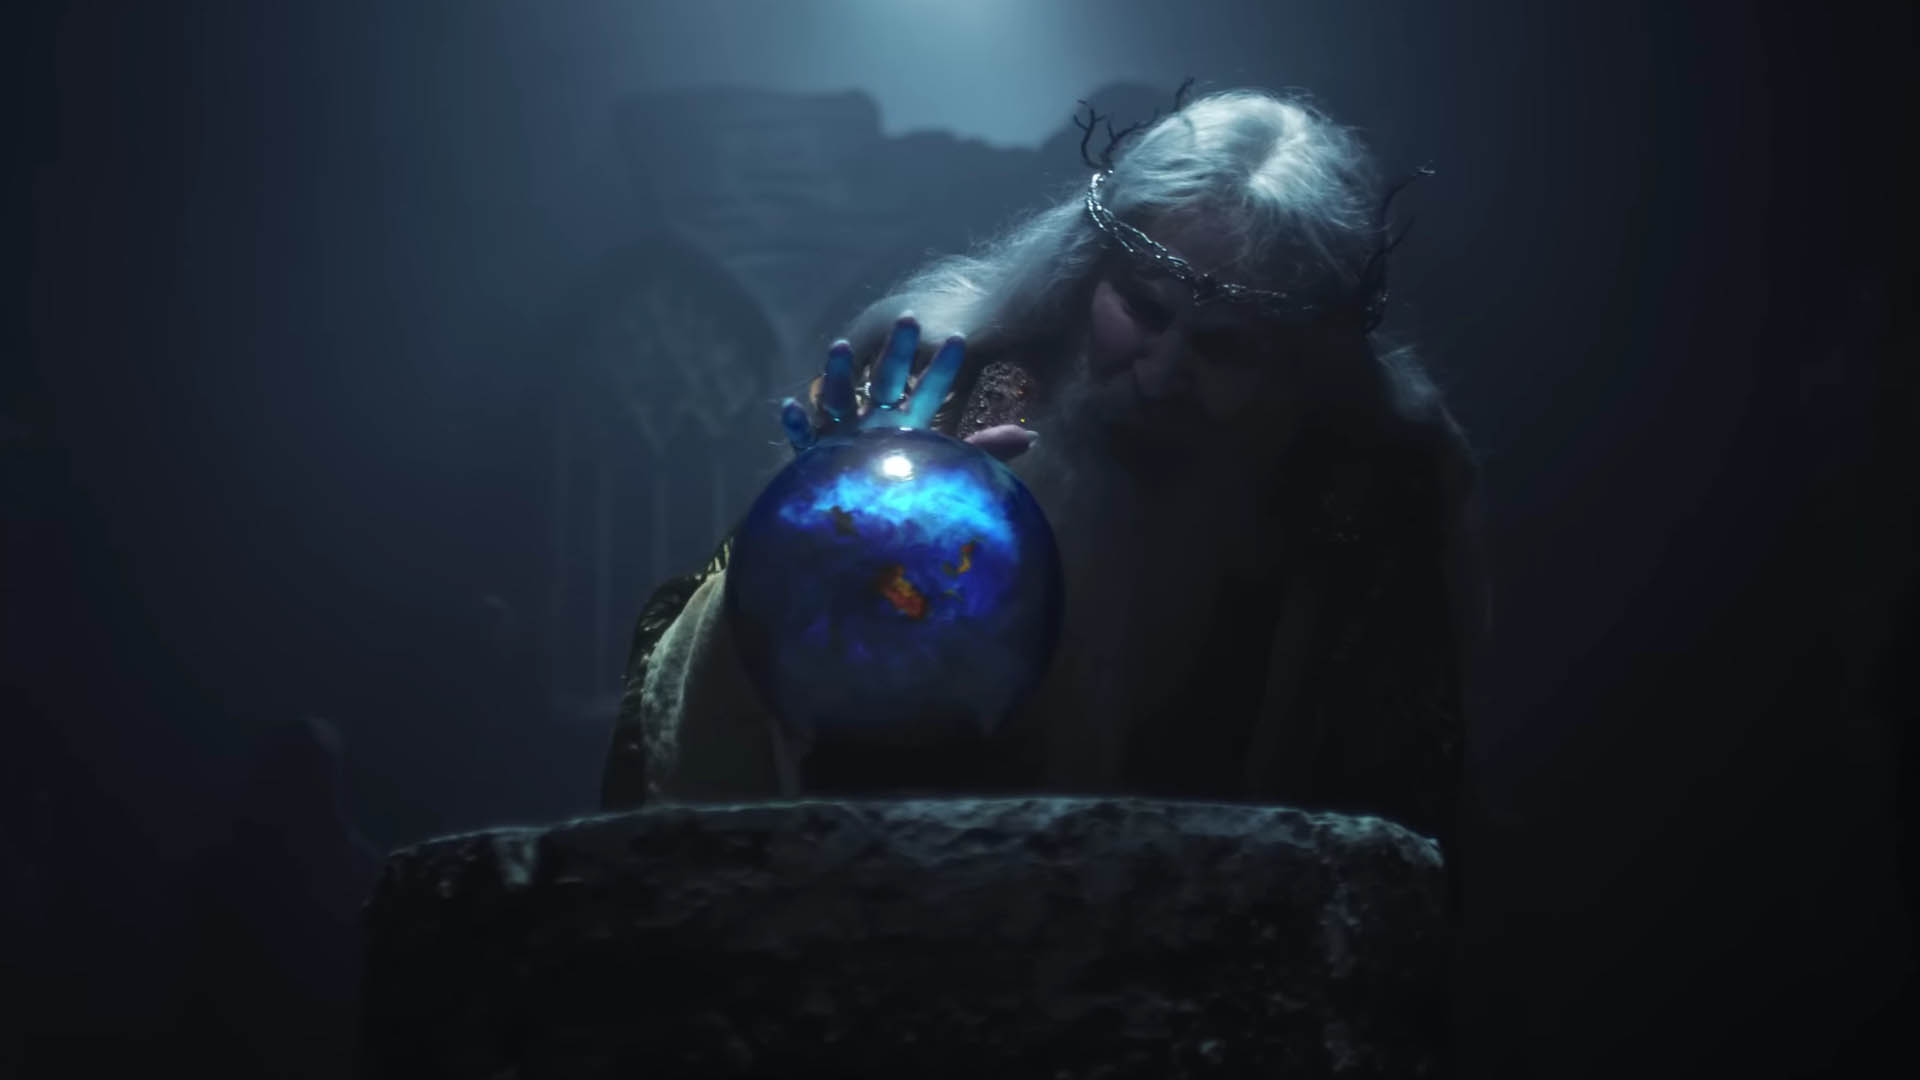 story orb-pondering - its Atlas new Gamer live-action introduces Niche in Fallen trailer